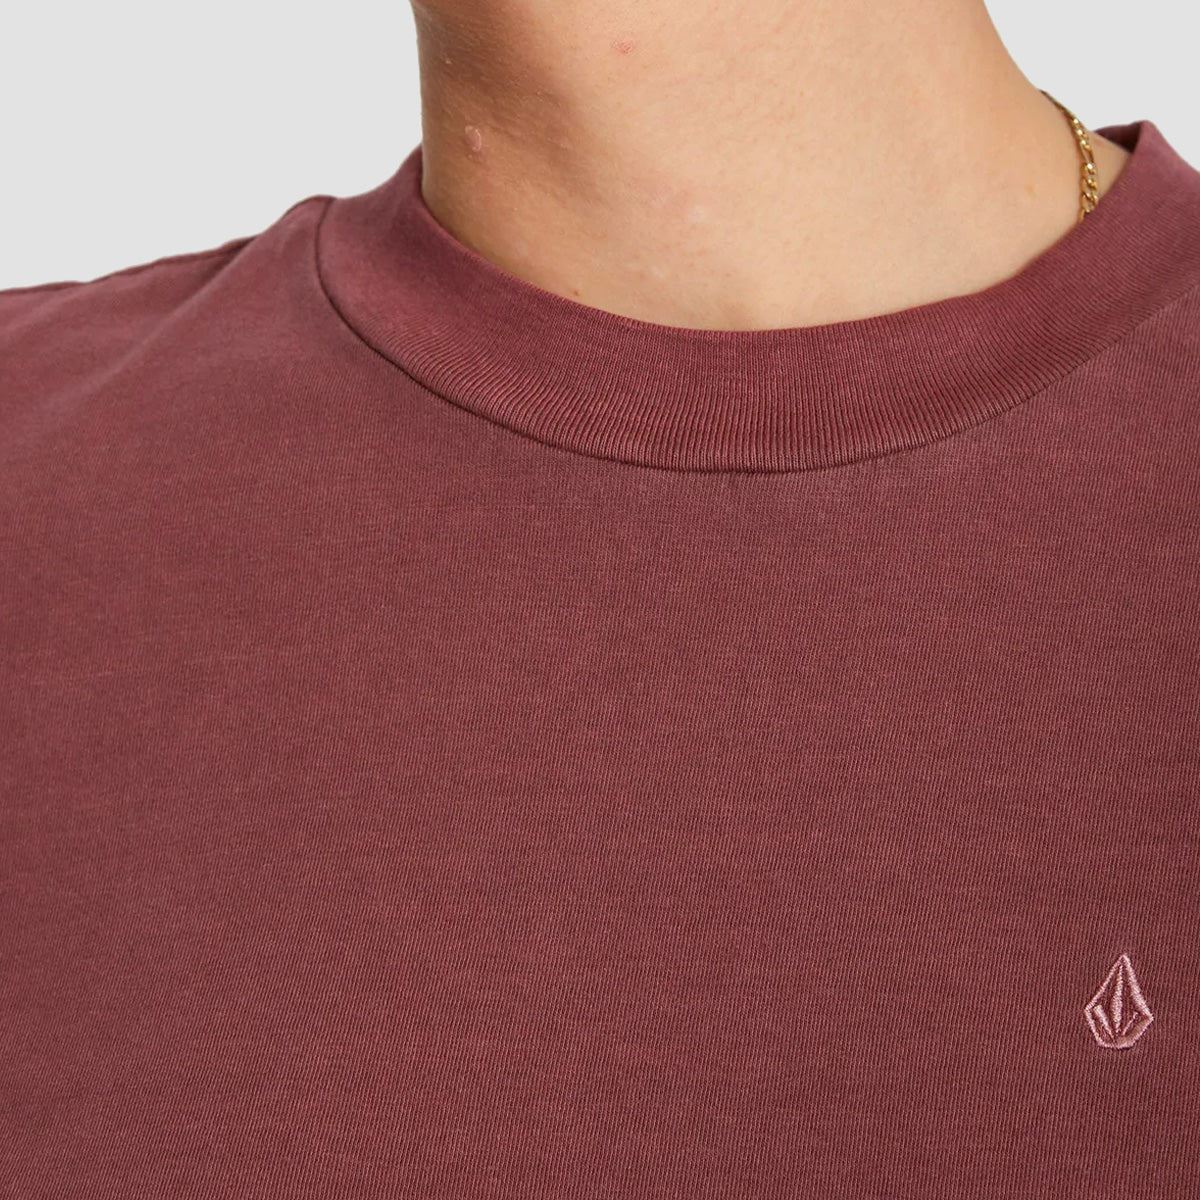 Volcom Solid Stone Embroidery T-Shirt Burgundy - Womens